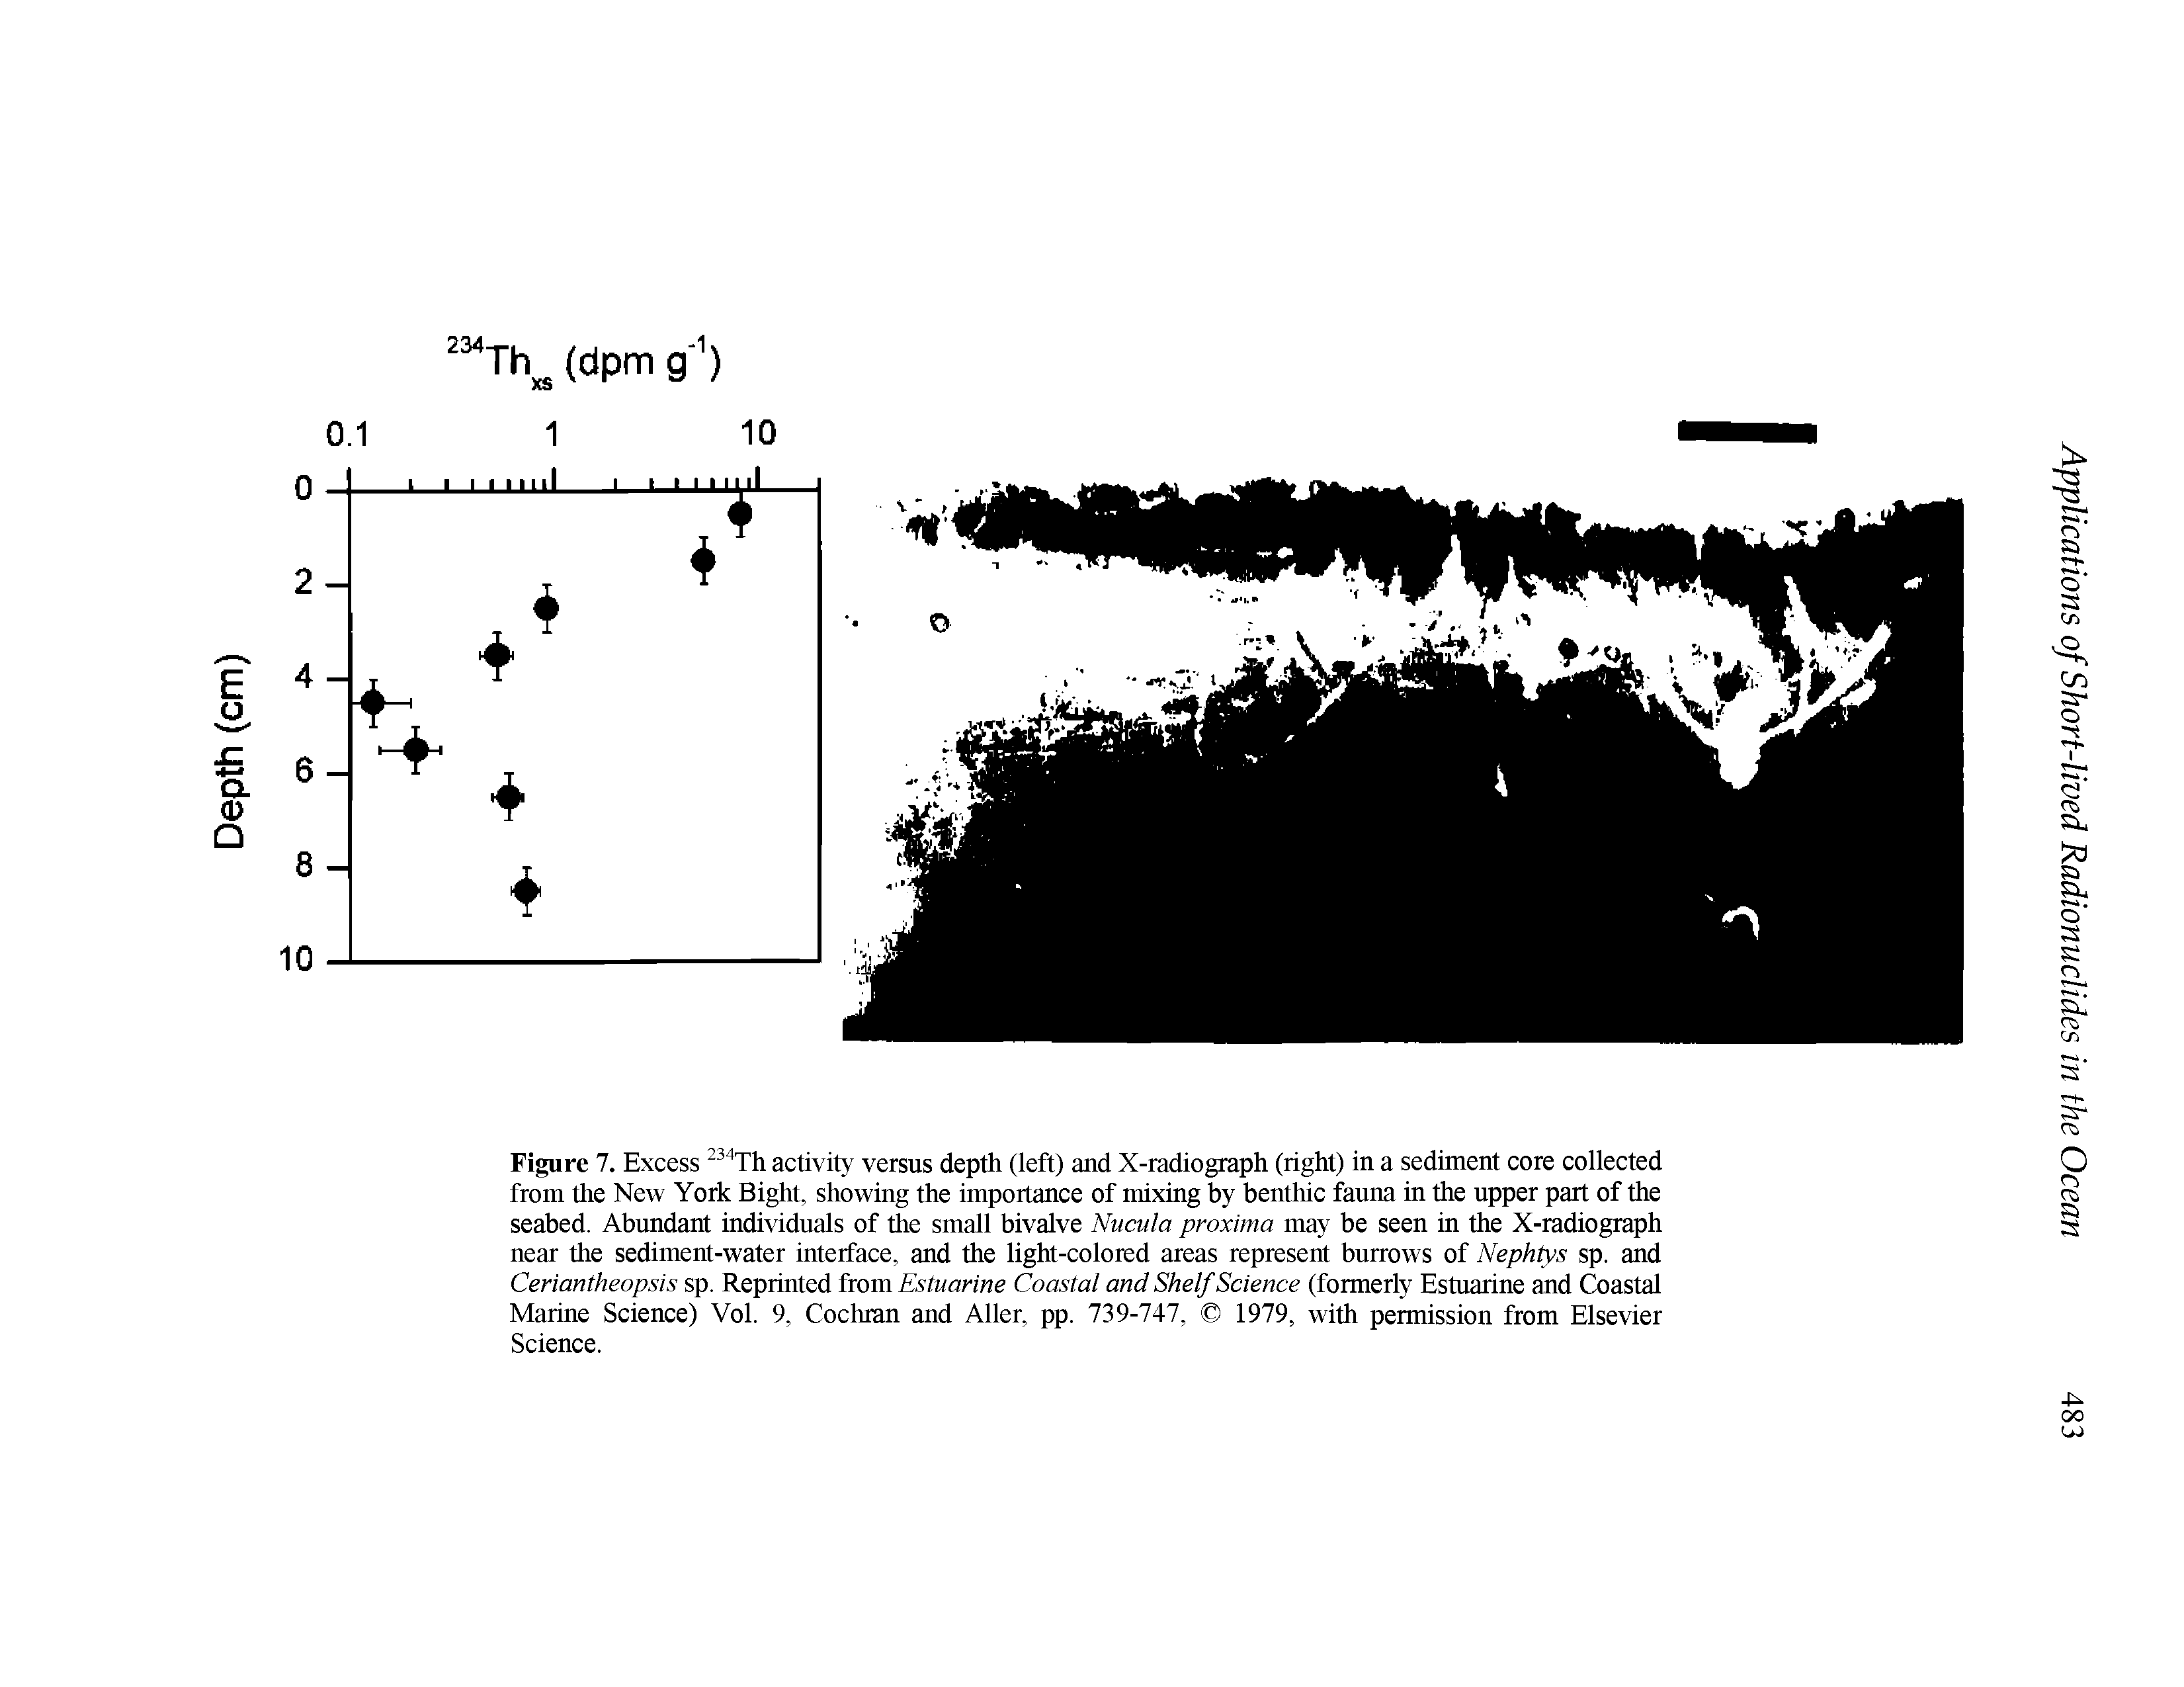 Figure 7. Excess activity versus depth (left) and X-radiograph (right) in a sediment core collected from the New York Bight, showing the importance of mixing by benthic fauna in the upper part of the seabed. Abundant individnals of the small bivalve Nucula proximo may be seen in the X-radiograph near the sediment-water interface, and the light-colored areas represent bnrrows of Nephtys sp. and Ceriantheopsis sp. Reprinted from Estuarine Coastal and Shelf Science (formerly Estuarine and Coastal Marine Science) Vol. 9, Cochran and Aller, pp. 739-747, 1979, with permission from Elsevier Science.